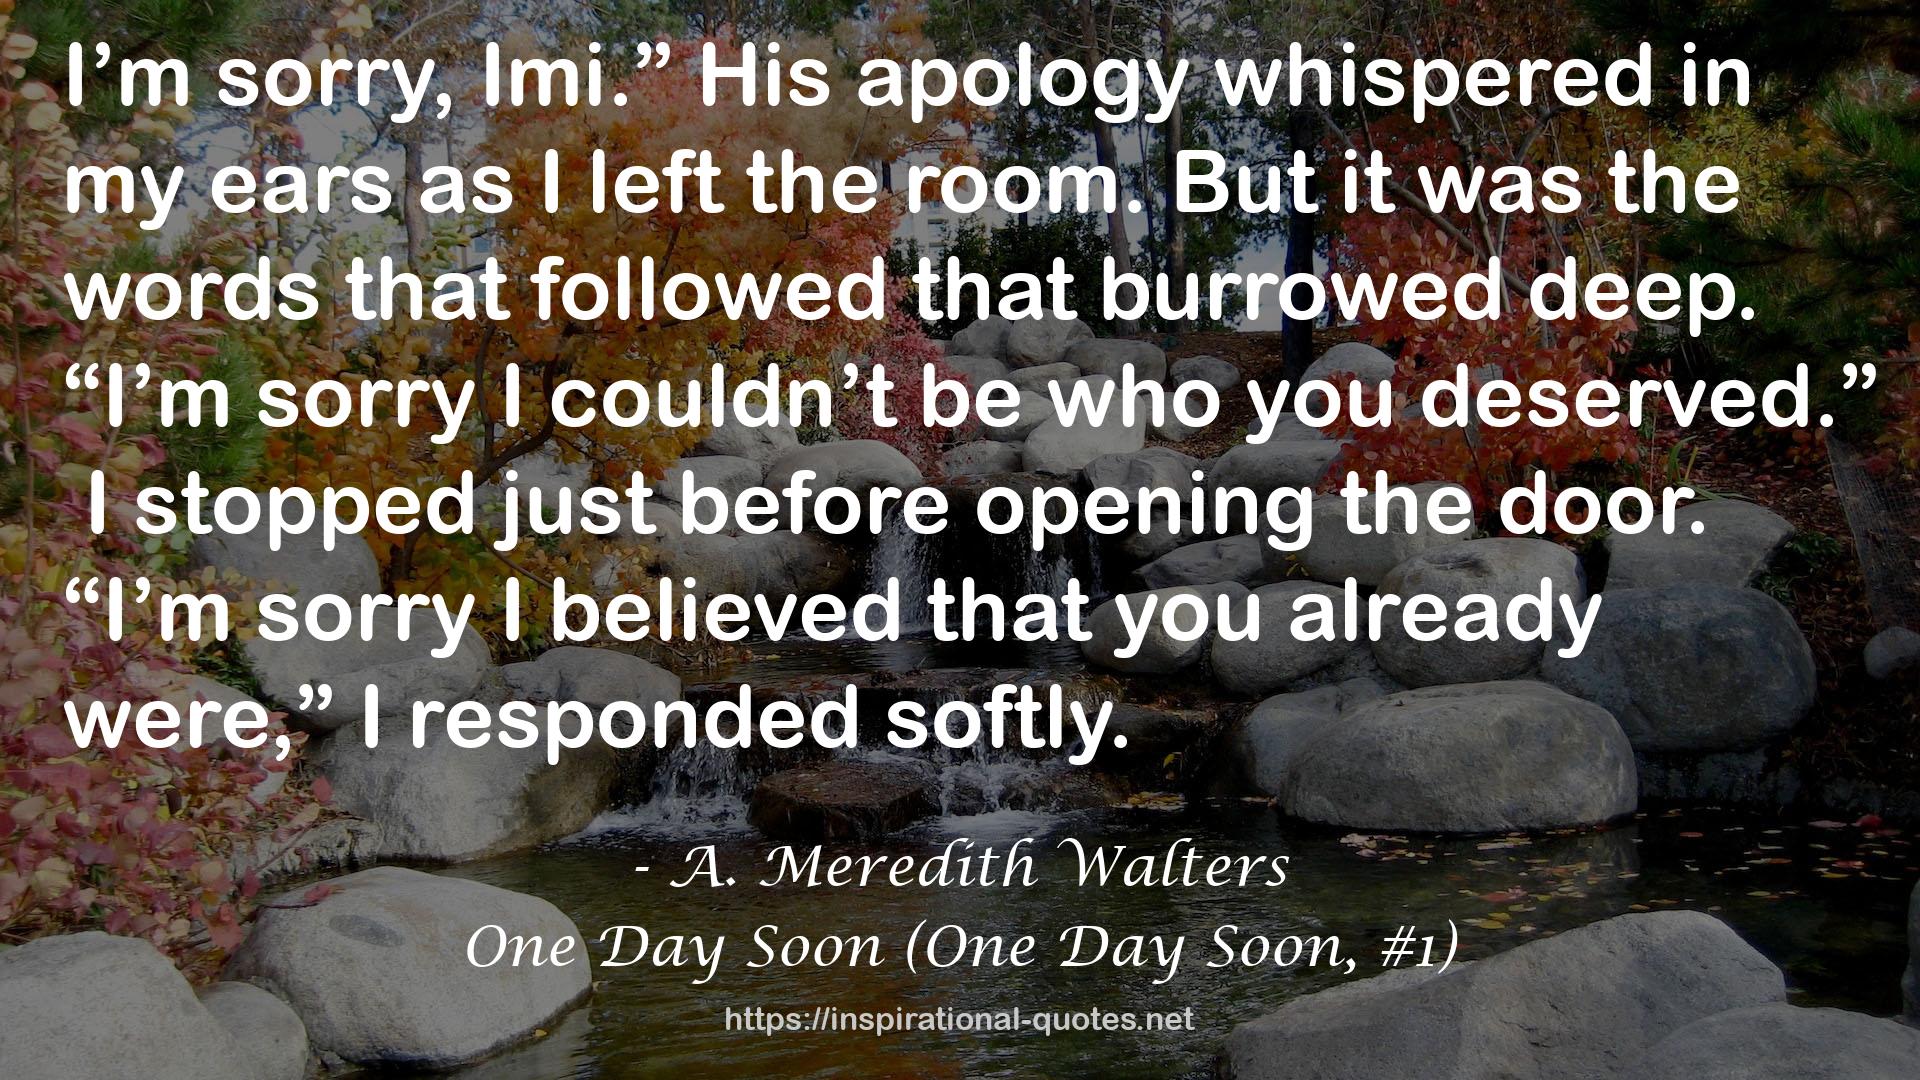 One Day Soon (One Day Soon, #1) QUOTES